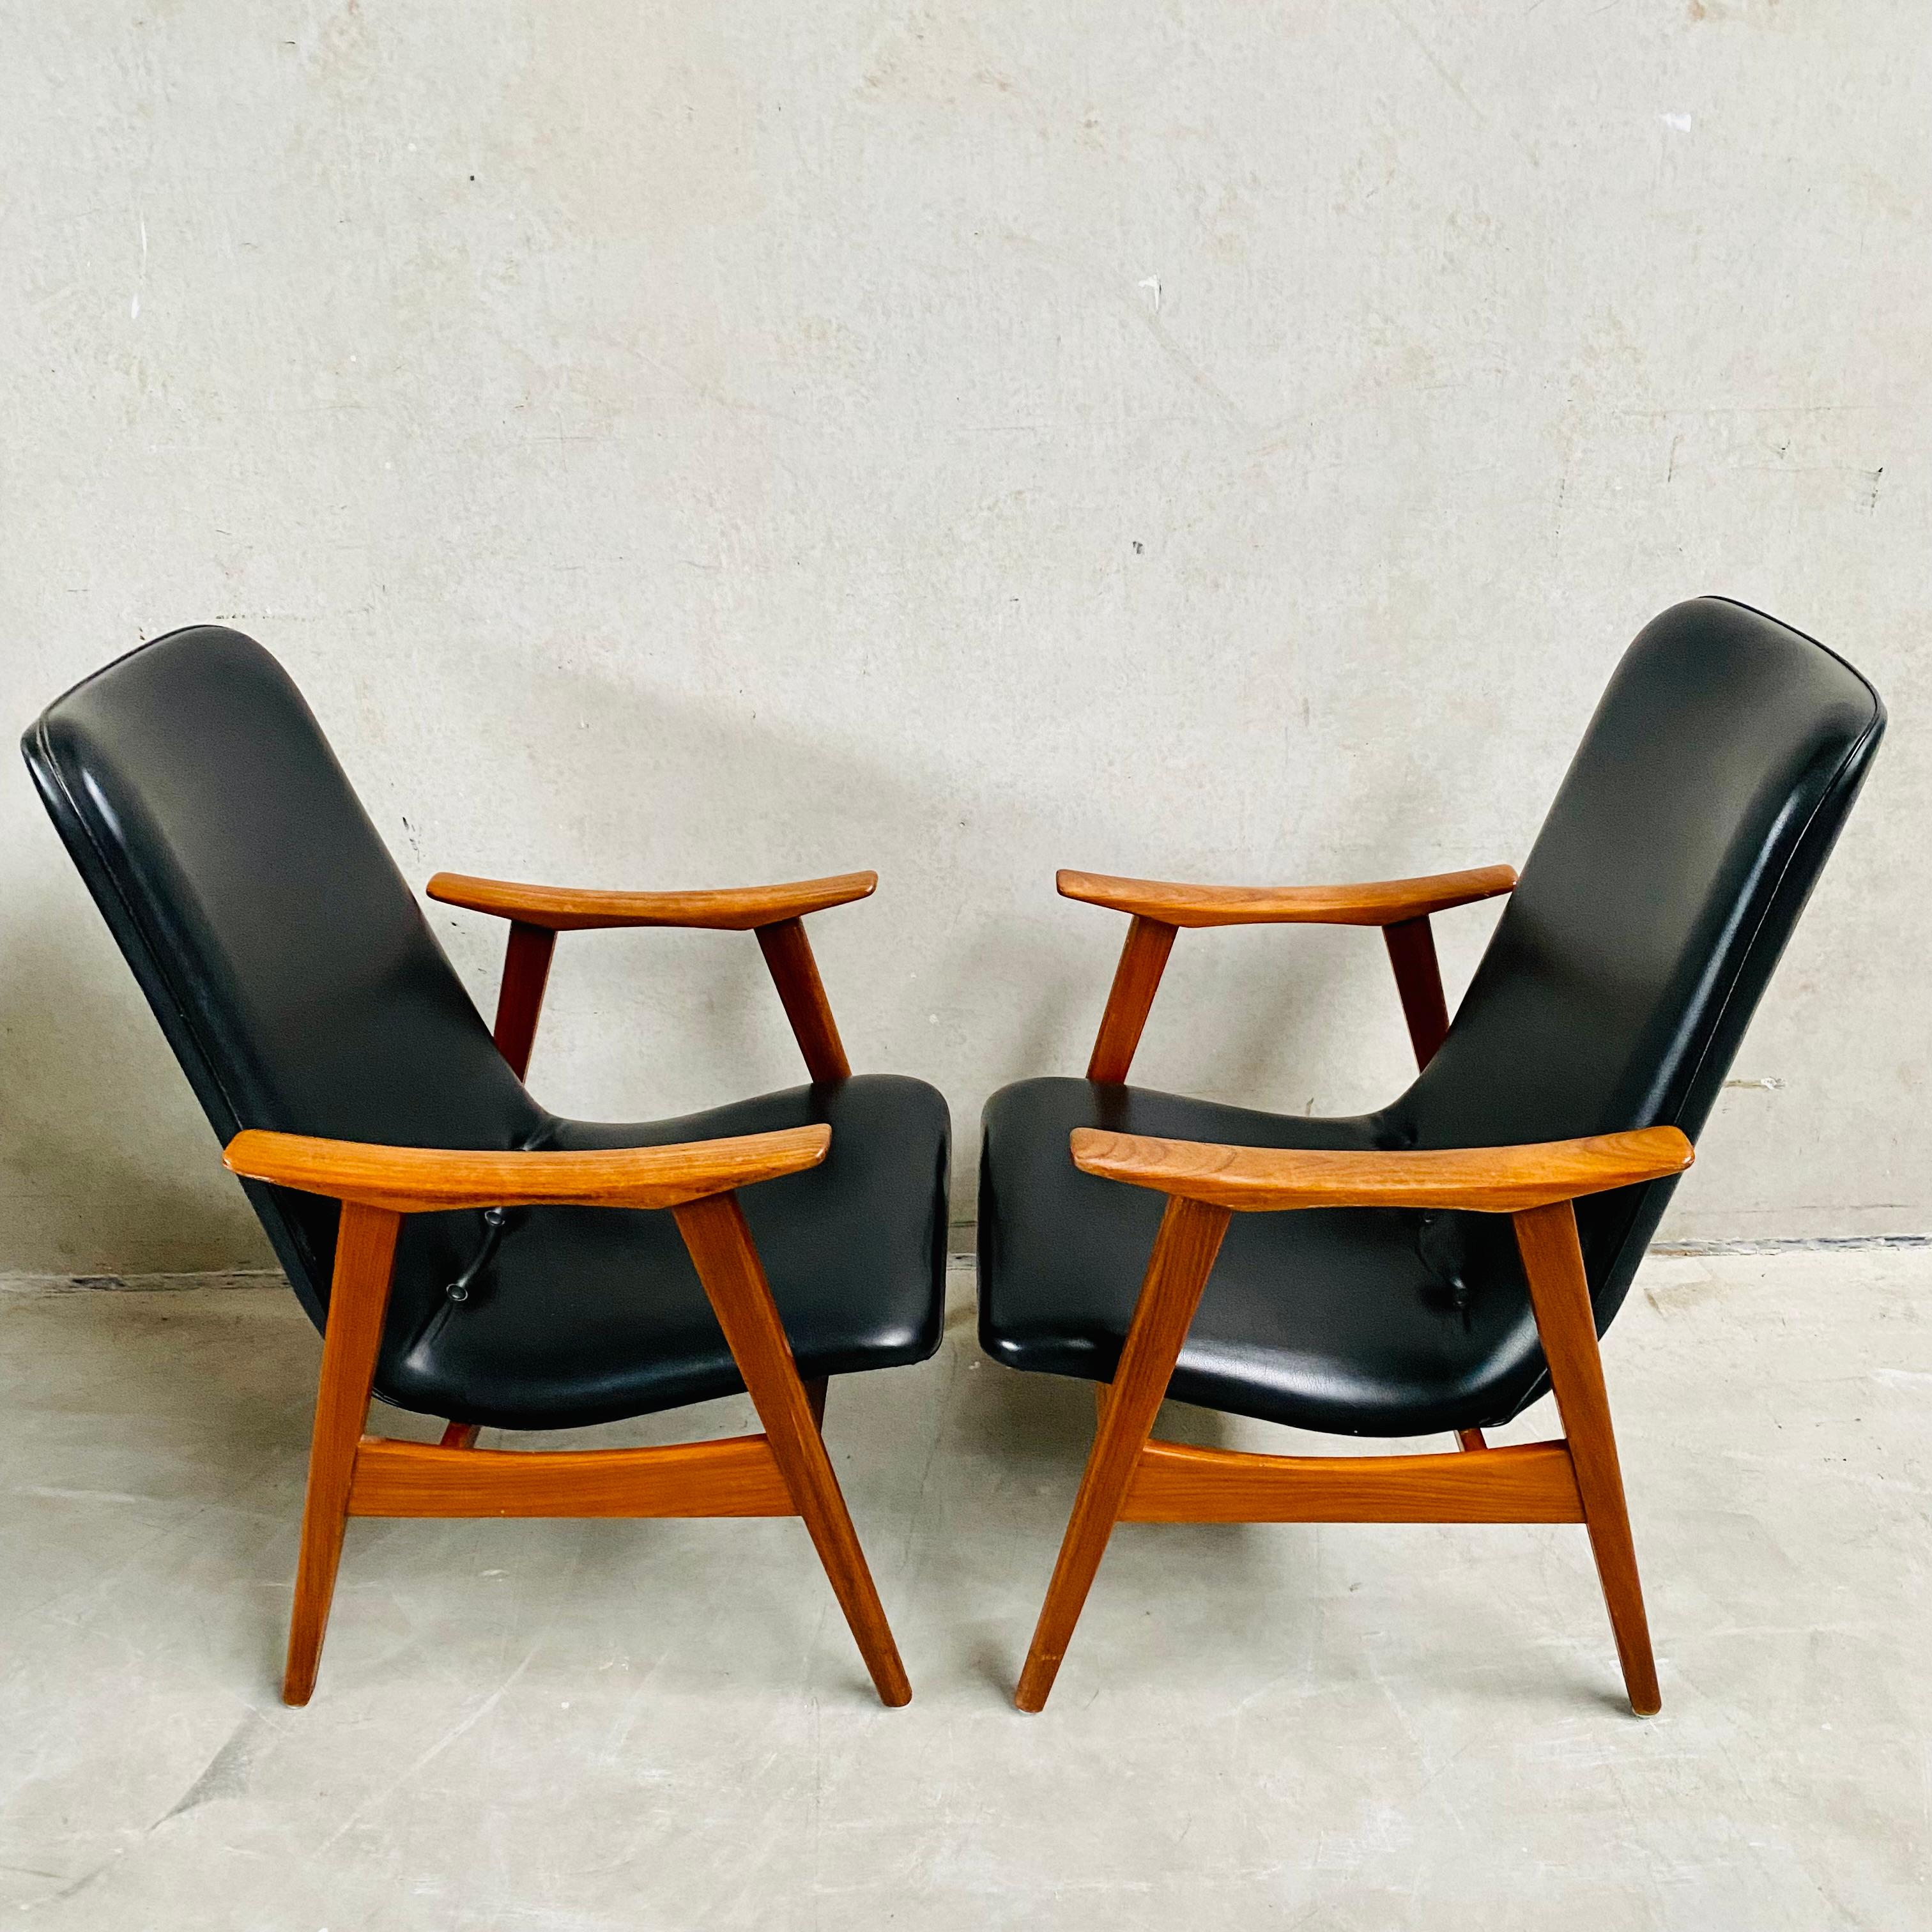 Set of Two Louis Van Teeffelen for Webe Lounge Chairs, Netherlands, 1960s For Sale 7